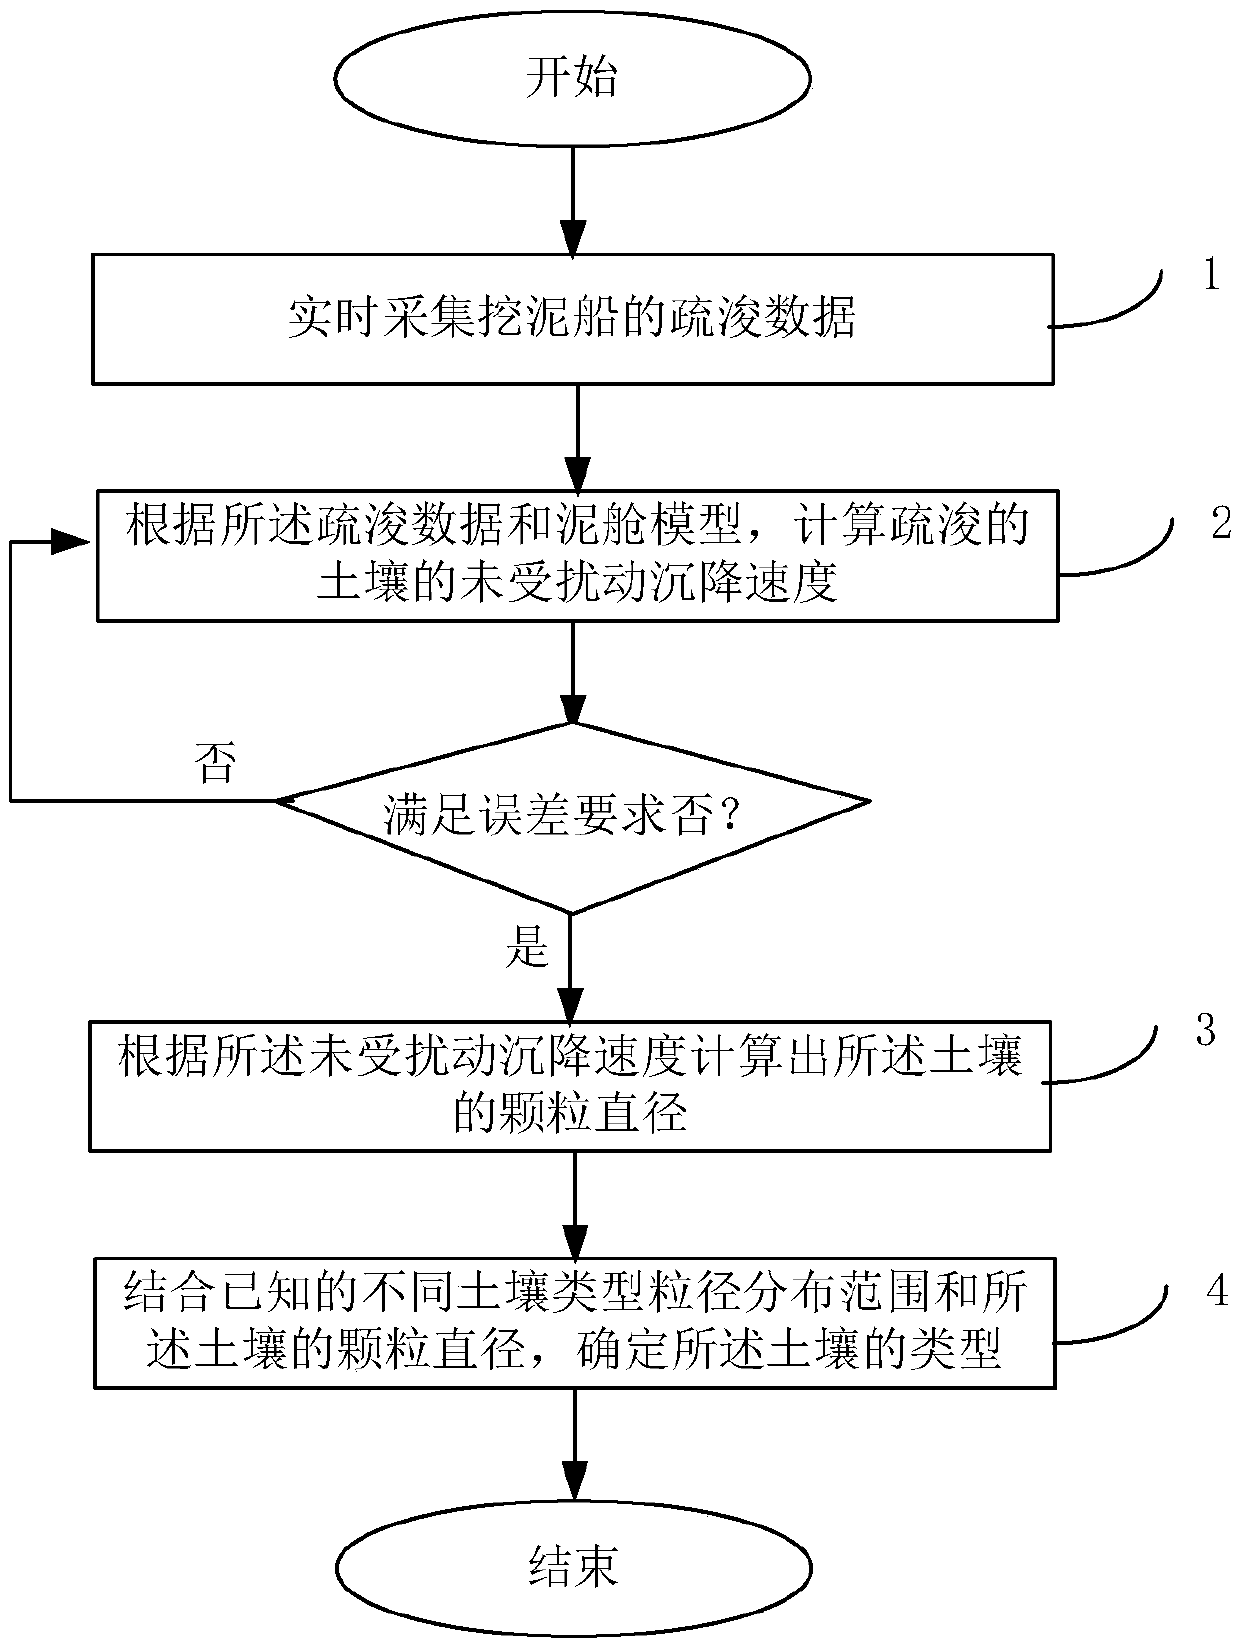 Soil type analysis method and control method for dredging by dredger